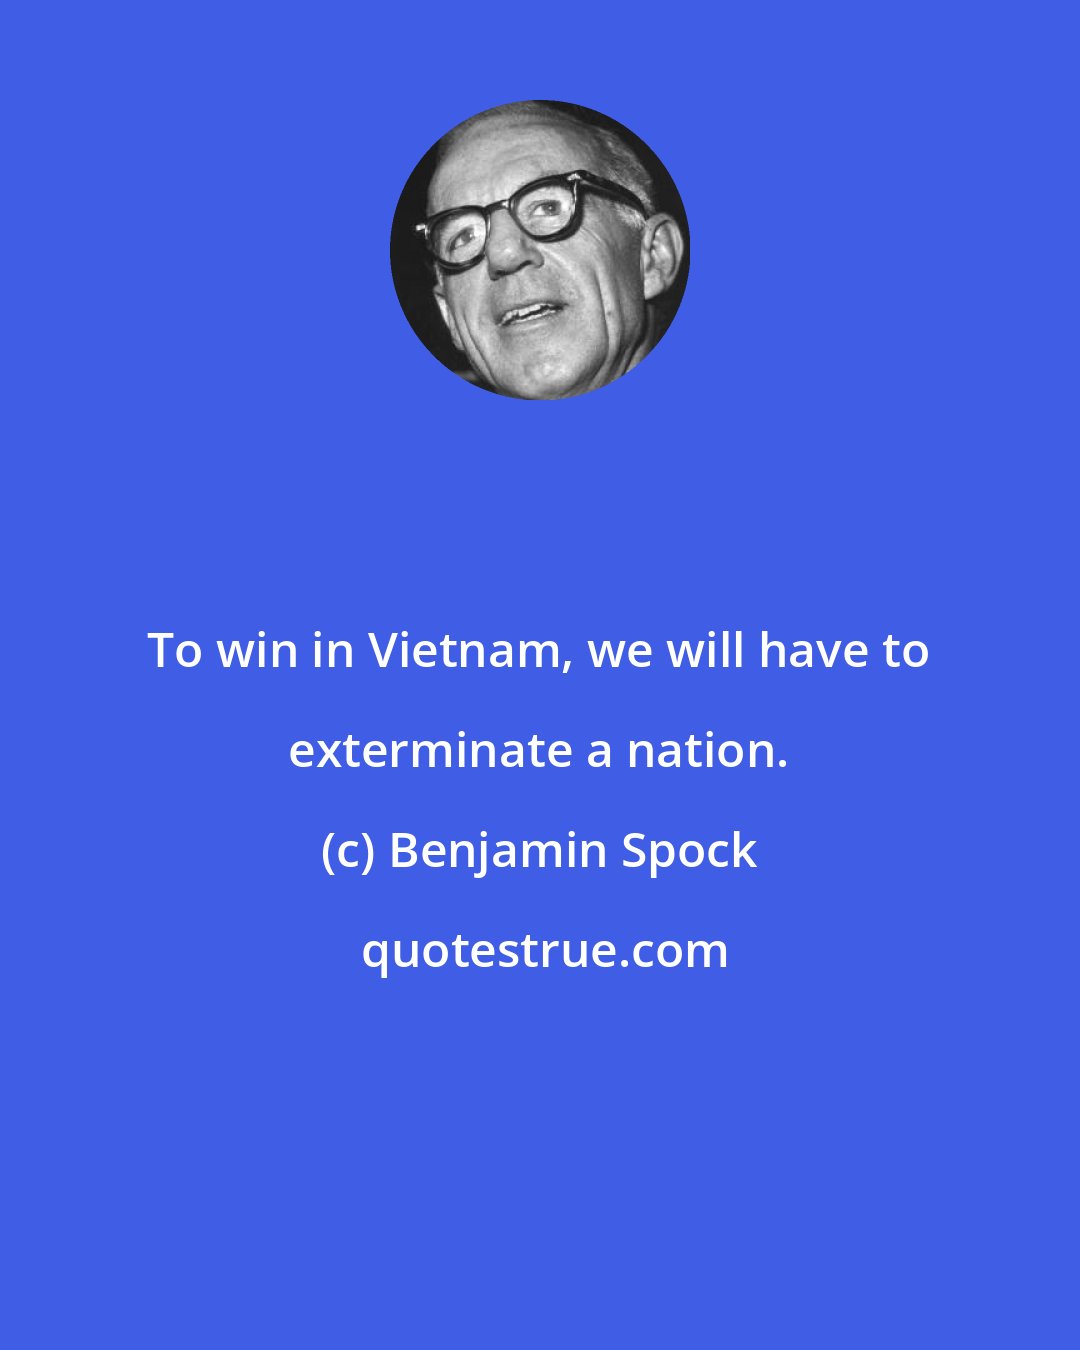 Benjamin Spock: To win in Vietnam, we will have to exterminate a nation.